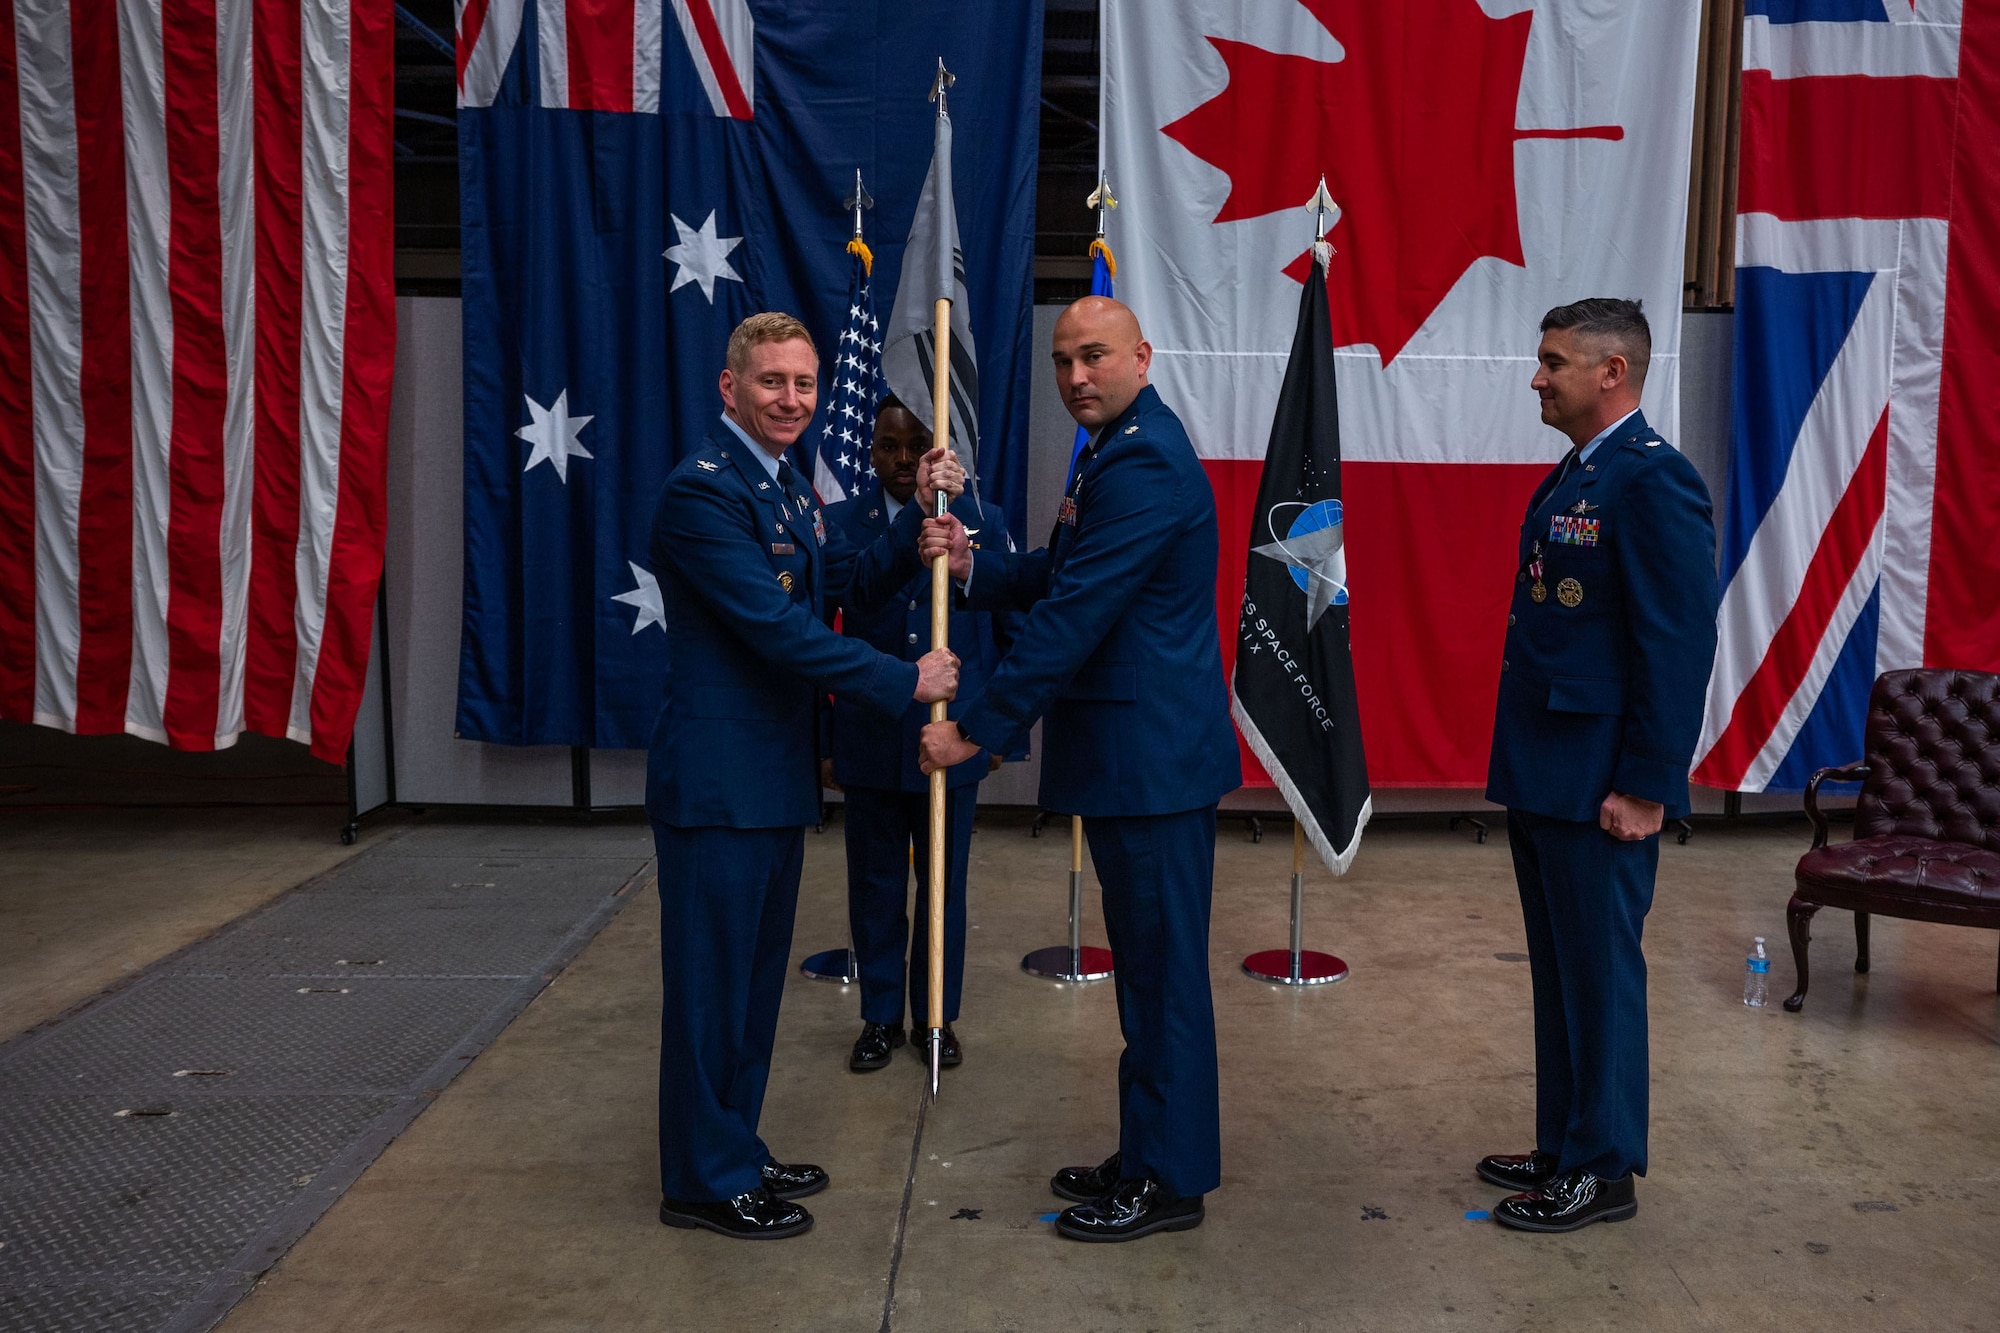 U.S. Space Force Col. Christopher Kenedy, Space Delta 6 commander, right, presents the 65th Cyberspace Squadron (65 CYS) guidon to Lt. Col. Jacob Majewski, incoming 65 CYS commander, middle, while Lt. Col. Jason Thompson, outoing 65 CYS commander, stands by during the 65 CYS change of command ceremony at Vandenberg Space Force Base, Calif., July 21, 2023. (U.S. Space Force photo by Tech. Sgt. Luke Kitterman)